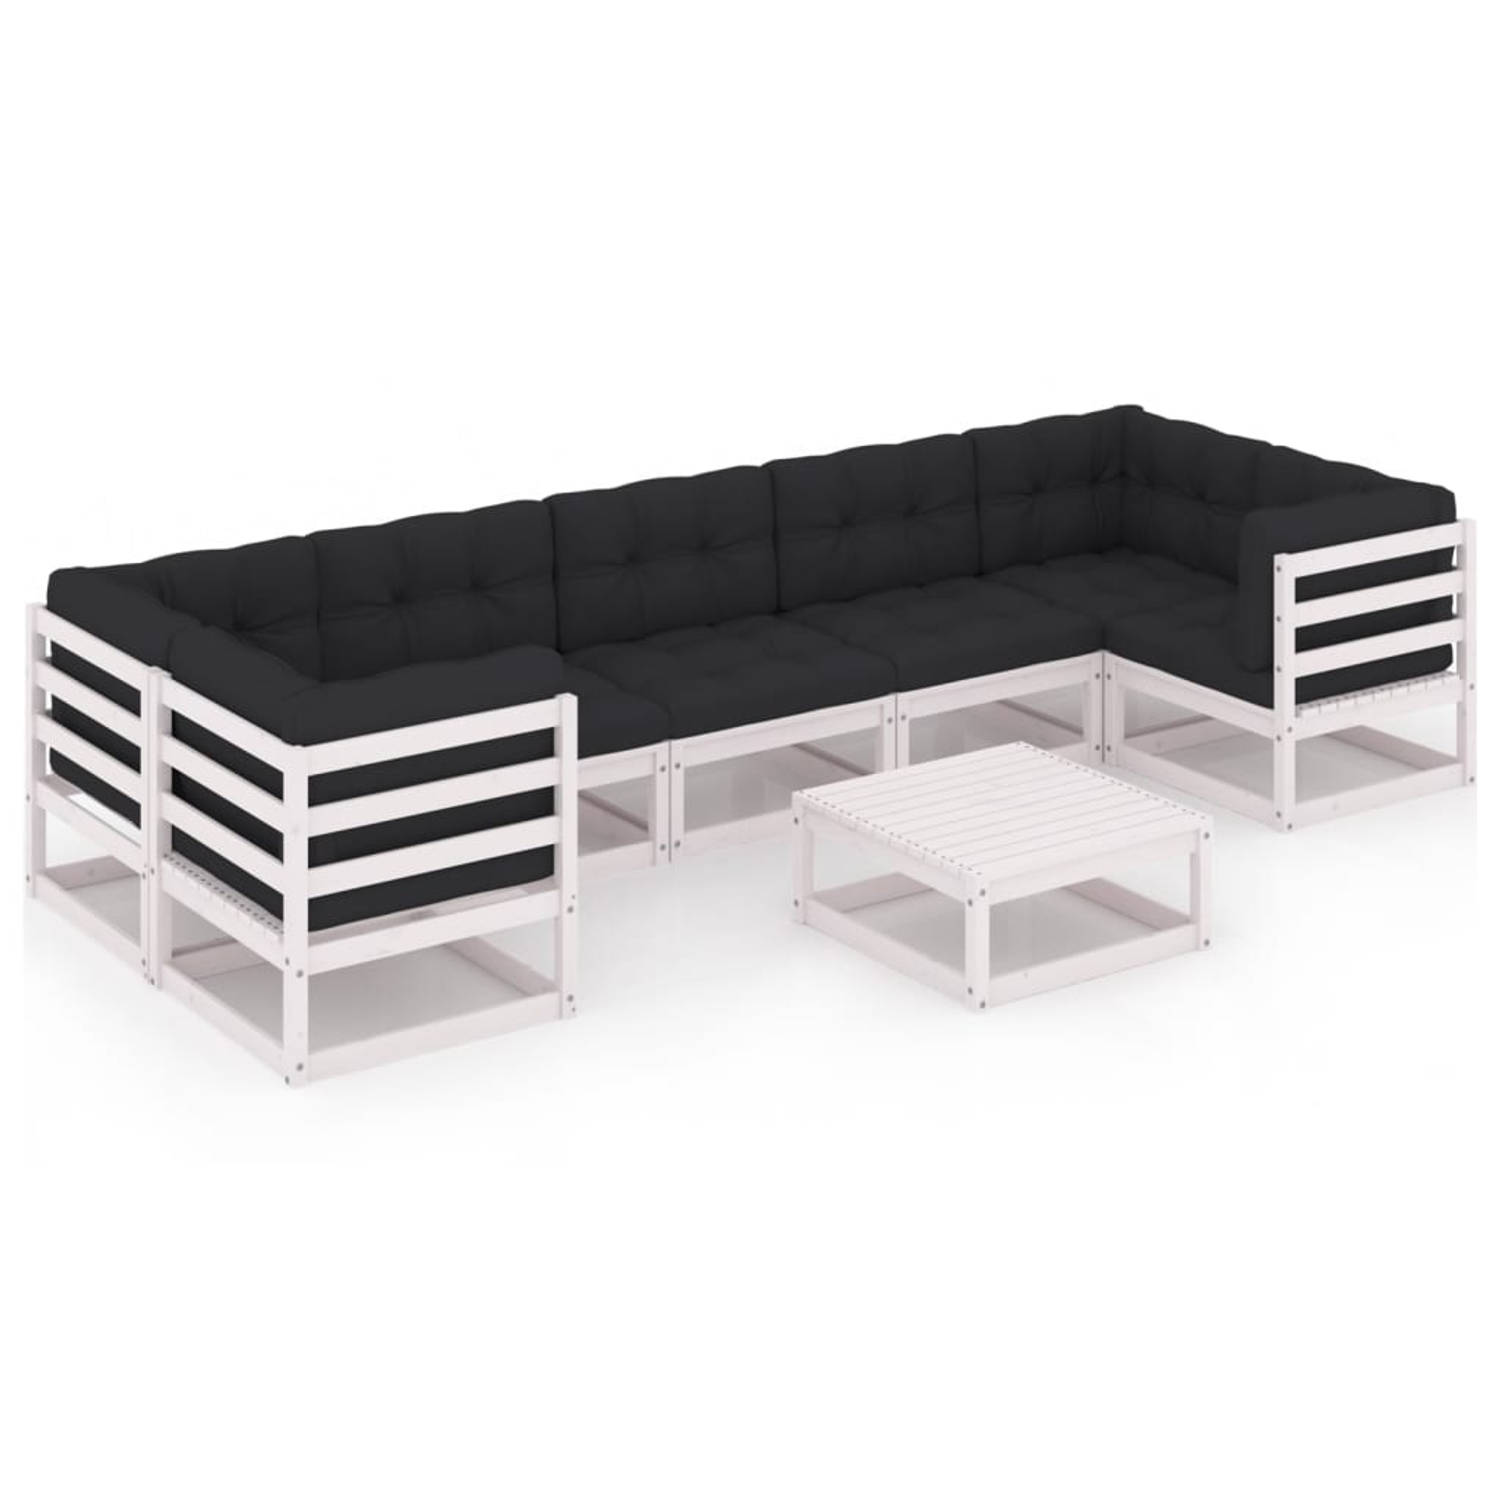 The Living Store Tuinset Grenenhout - Lounge - Wit - 70x70x67 cm - Inclusief kussens